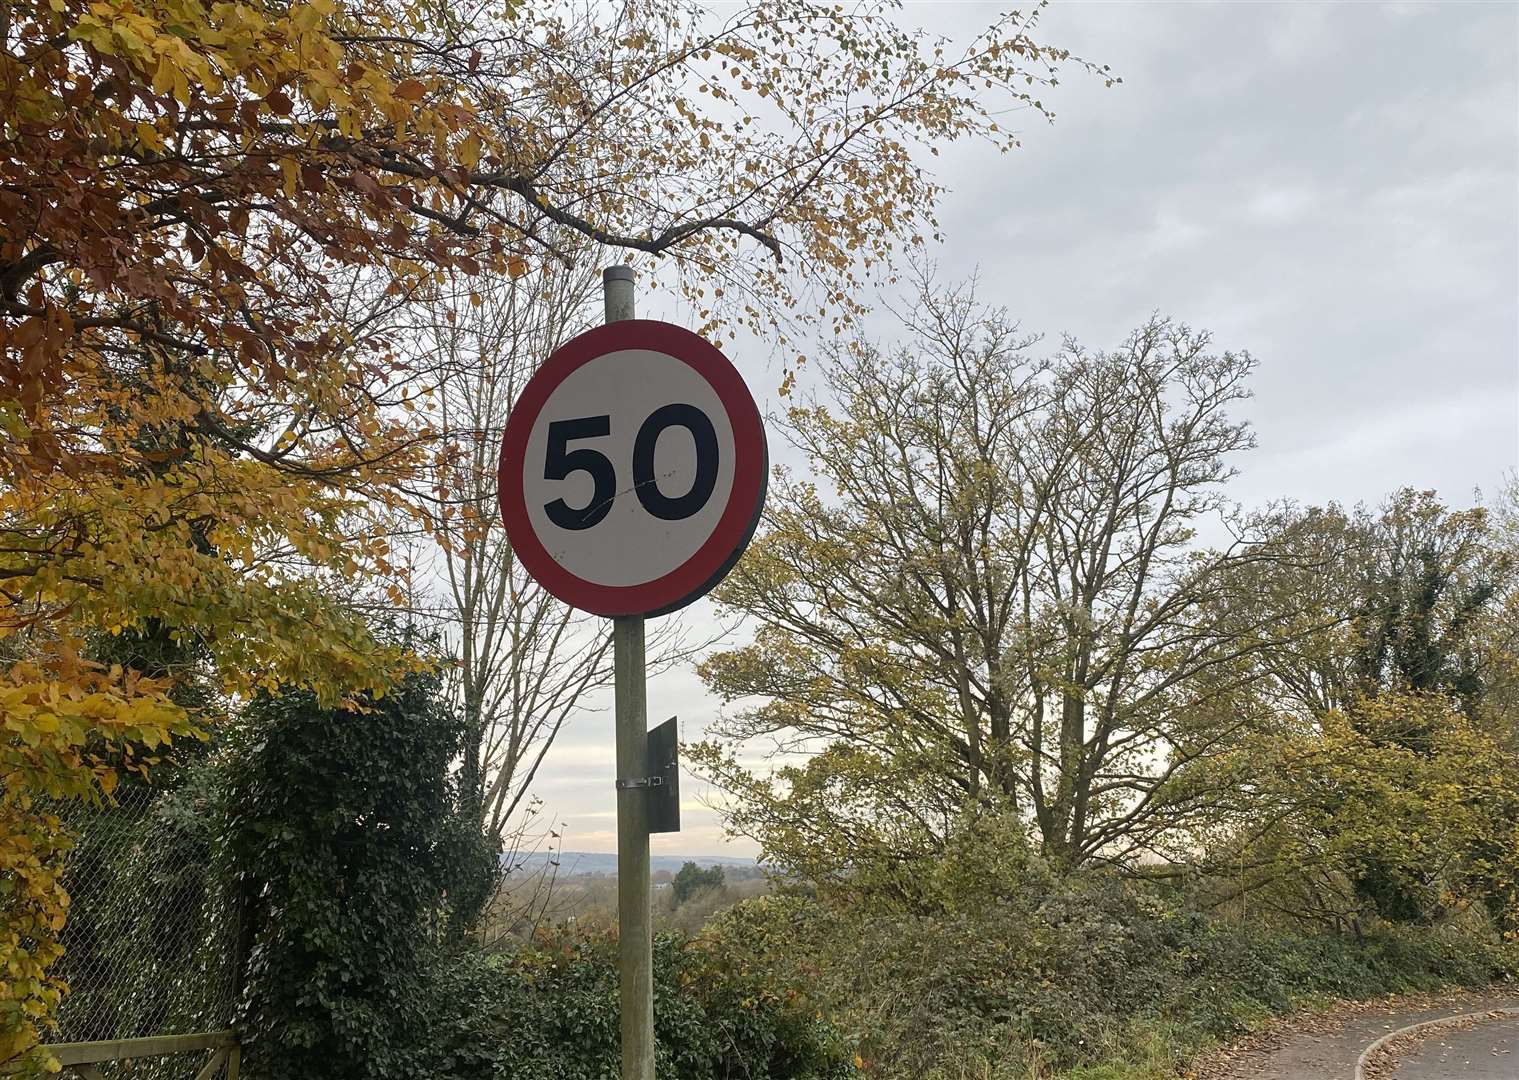 New signage has been installed explaining the new speed restriction and future average speed check